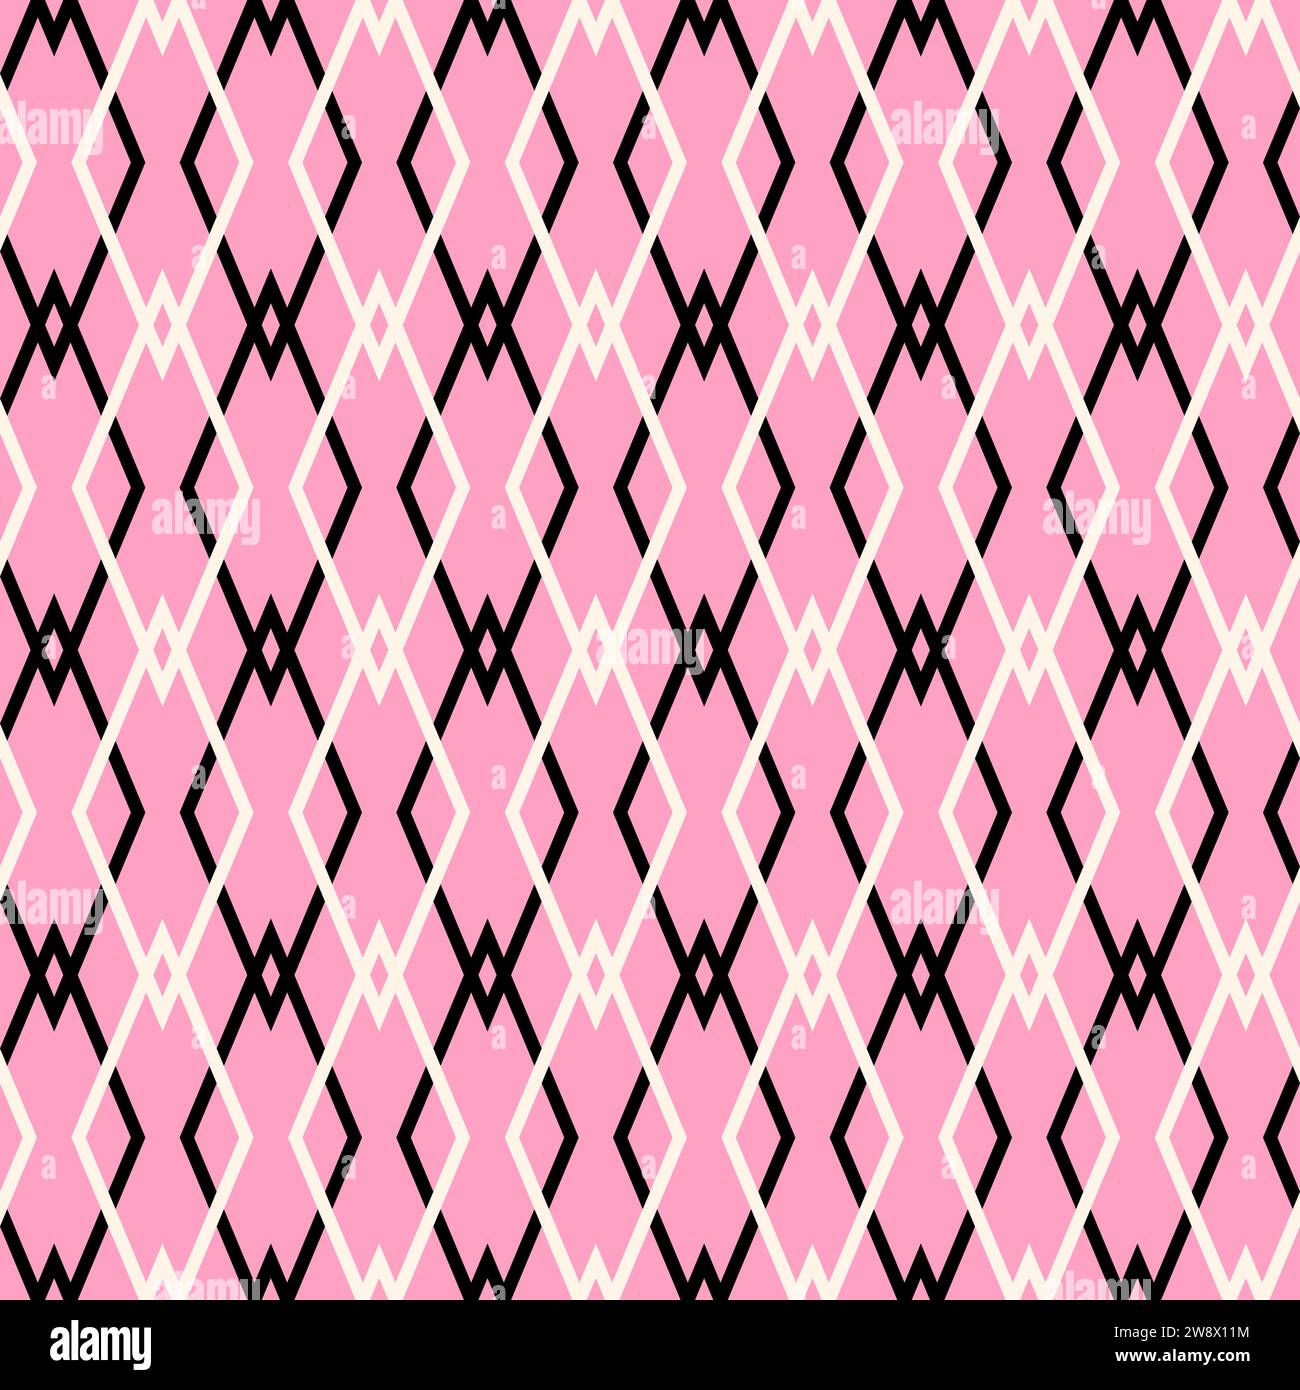 Seamless abstract geometric pattern. Retro style pink repeat background for fabric, textile print or wallpaper design. Vector Illustration. Stock Vector